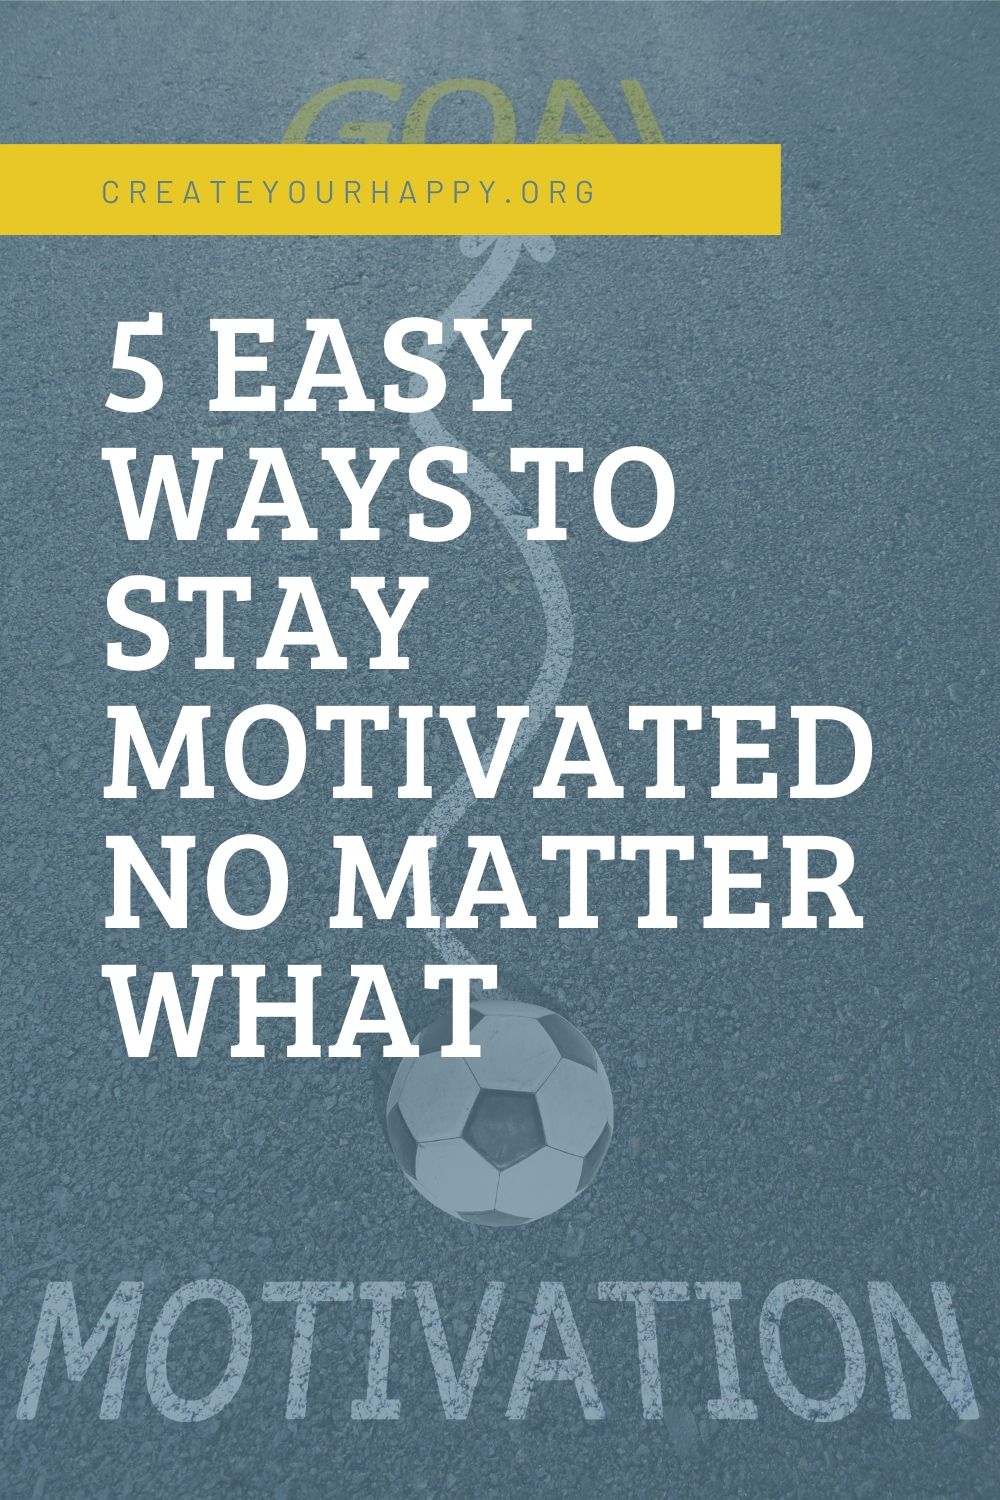 5 Easy Ways to Stay Motivated No Matter What